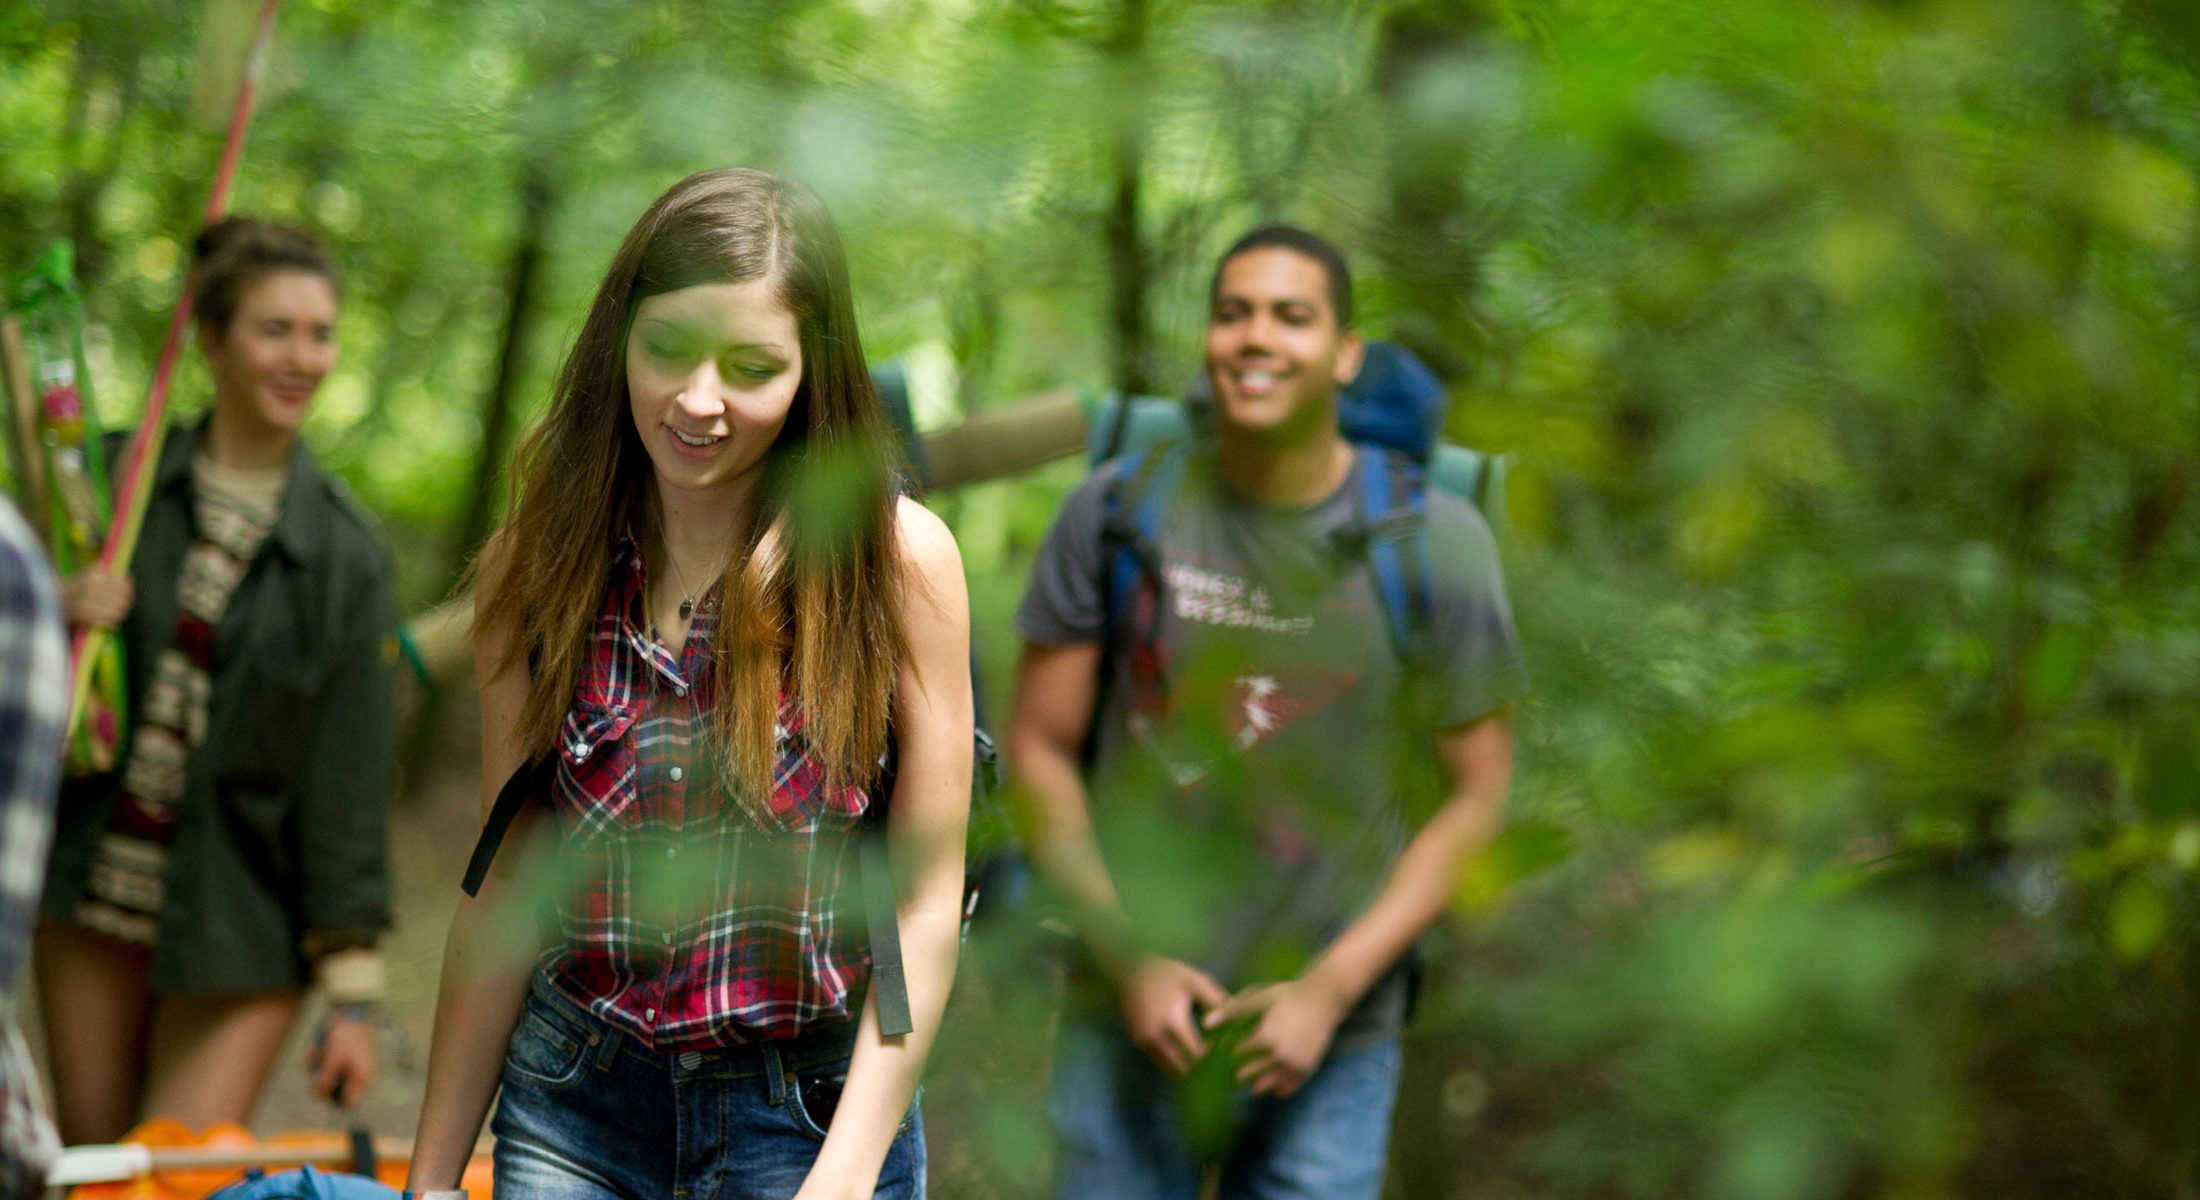 Group of teens smiling, exploring outdoors with backpacks and camping items